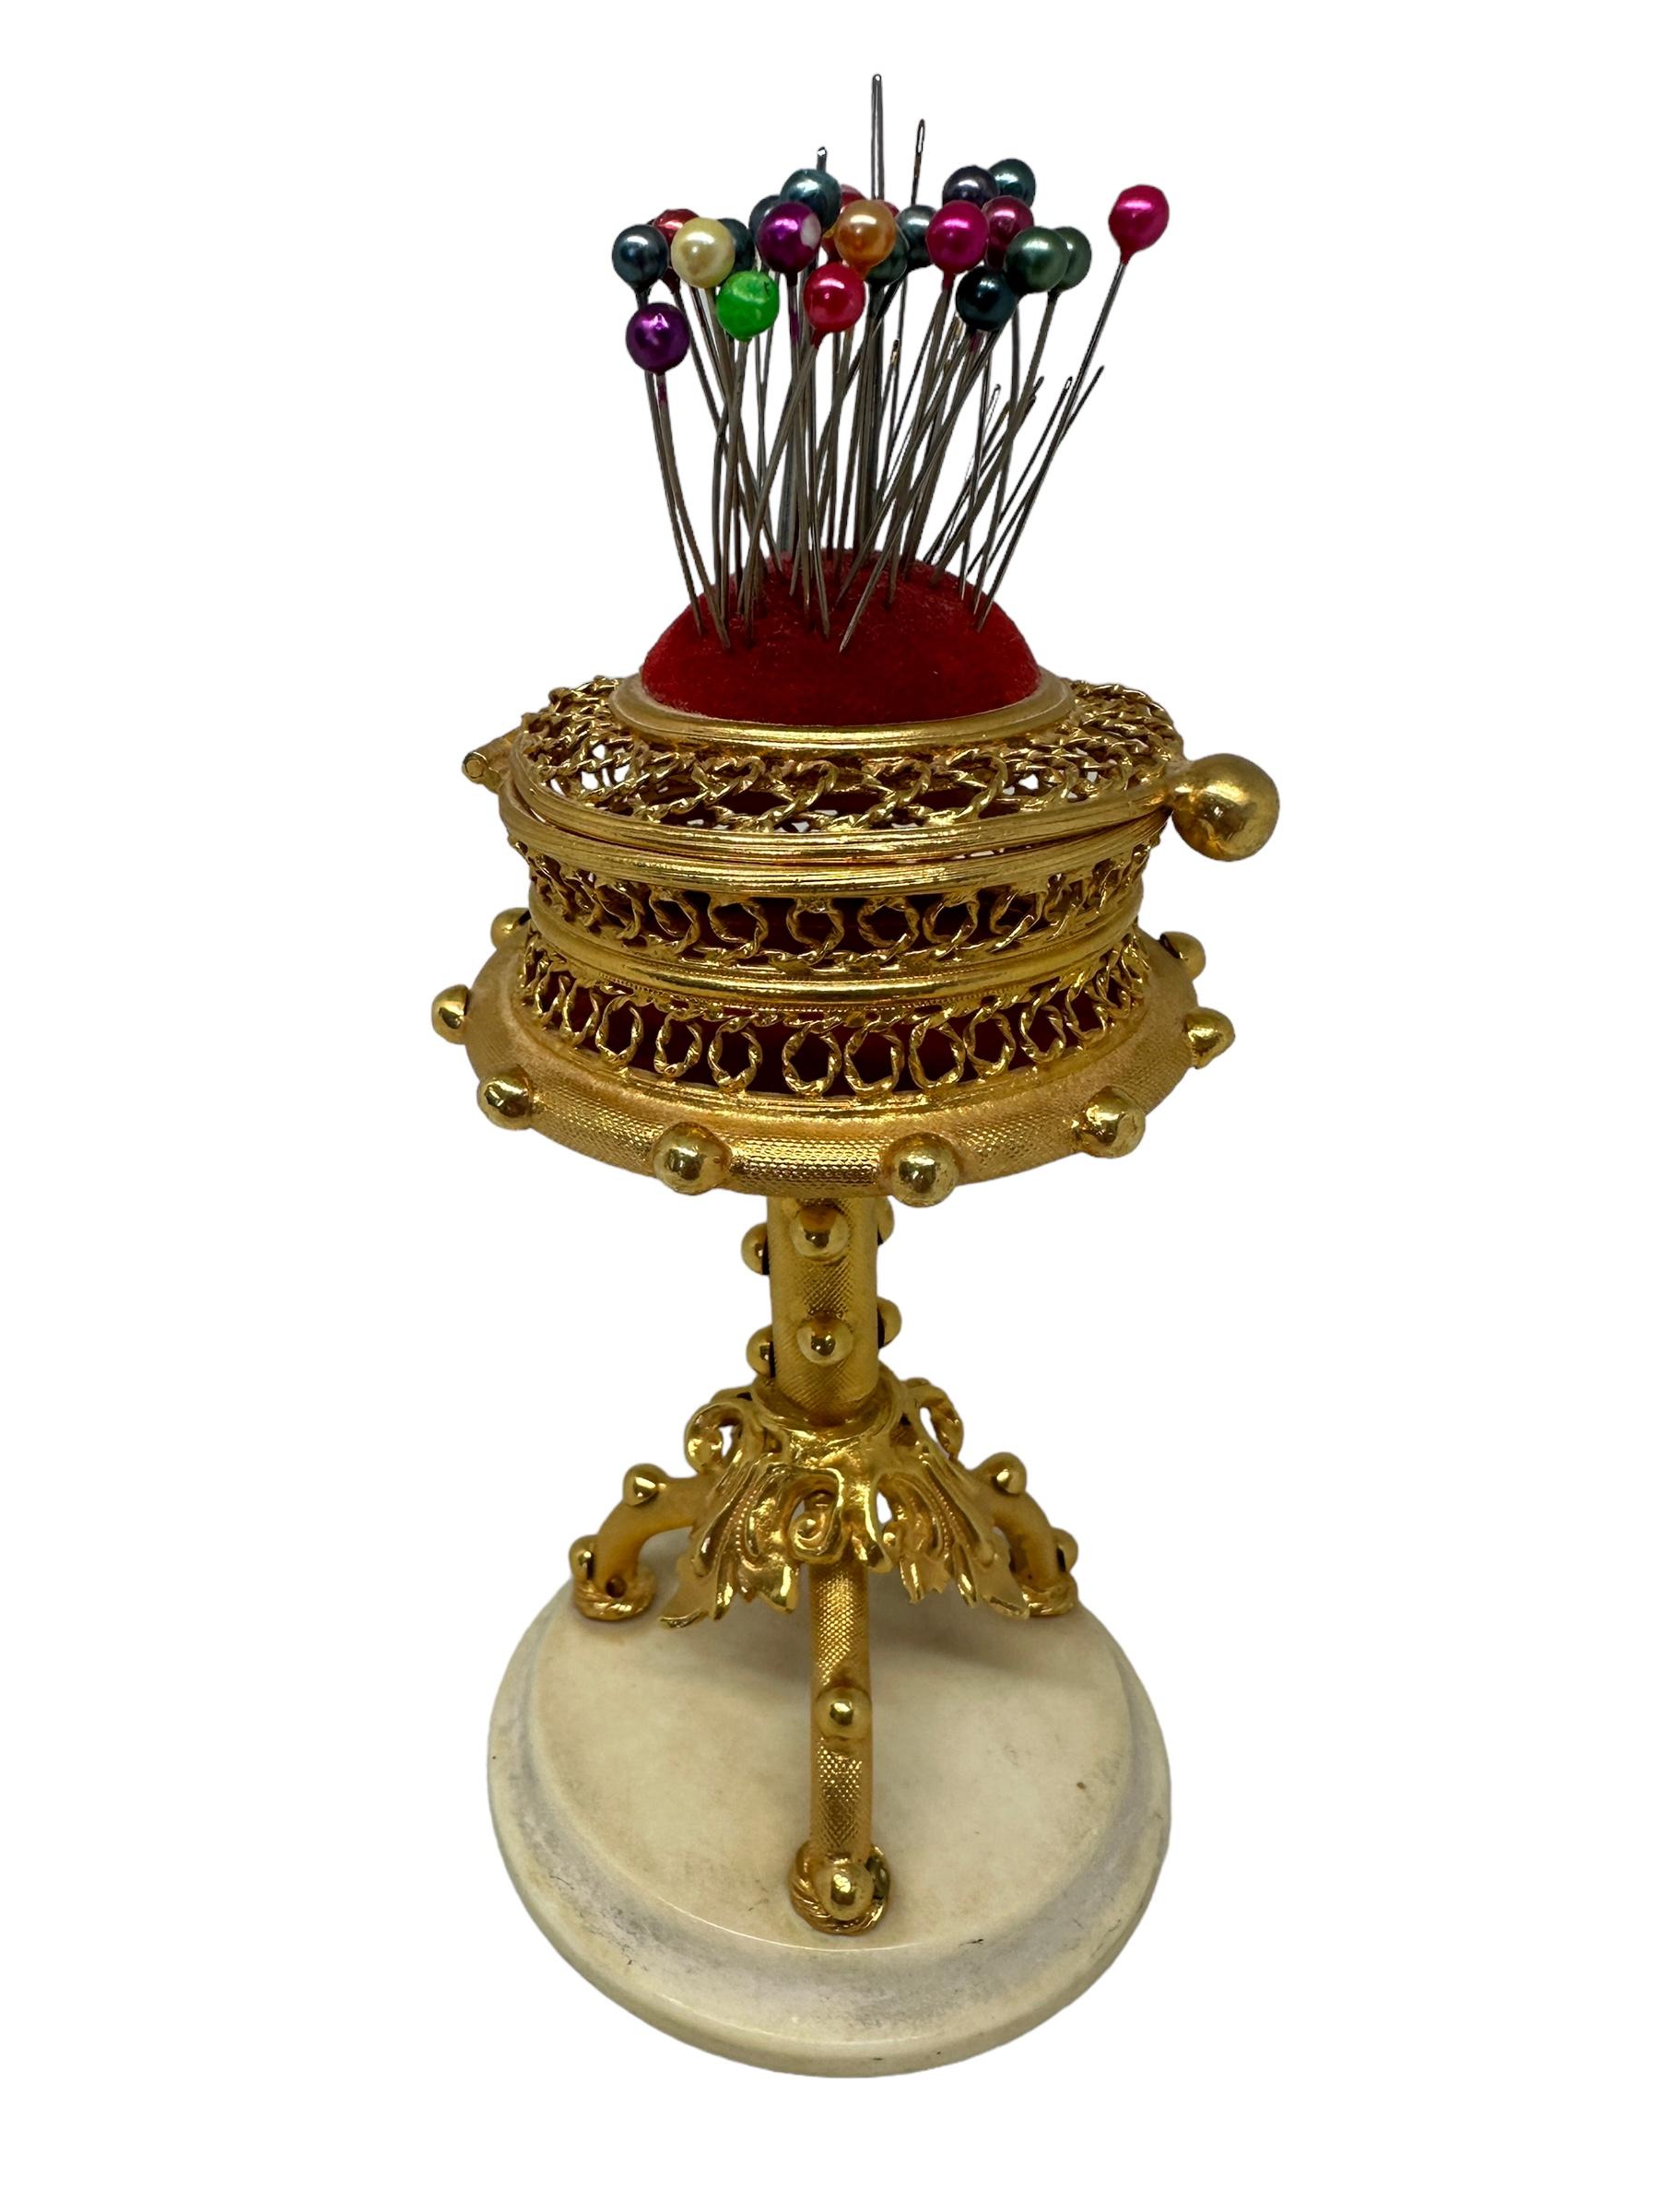 This listing is for a beautiful Austrian gilt metal needle box on a alabaster base with a pincushion on top, circa 1890s. A beautiful collector's item and sure to be a lovely addition to any room or collection. Purchased for you at an estate sale in